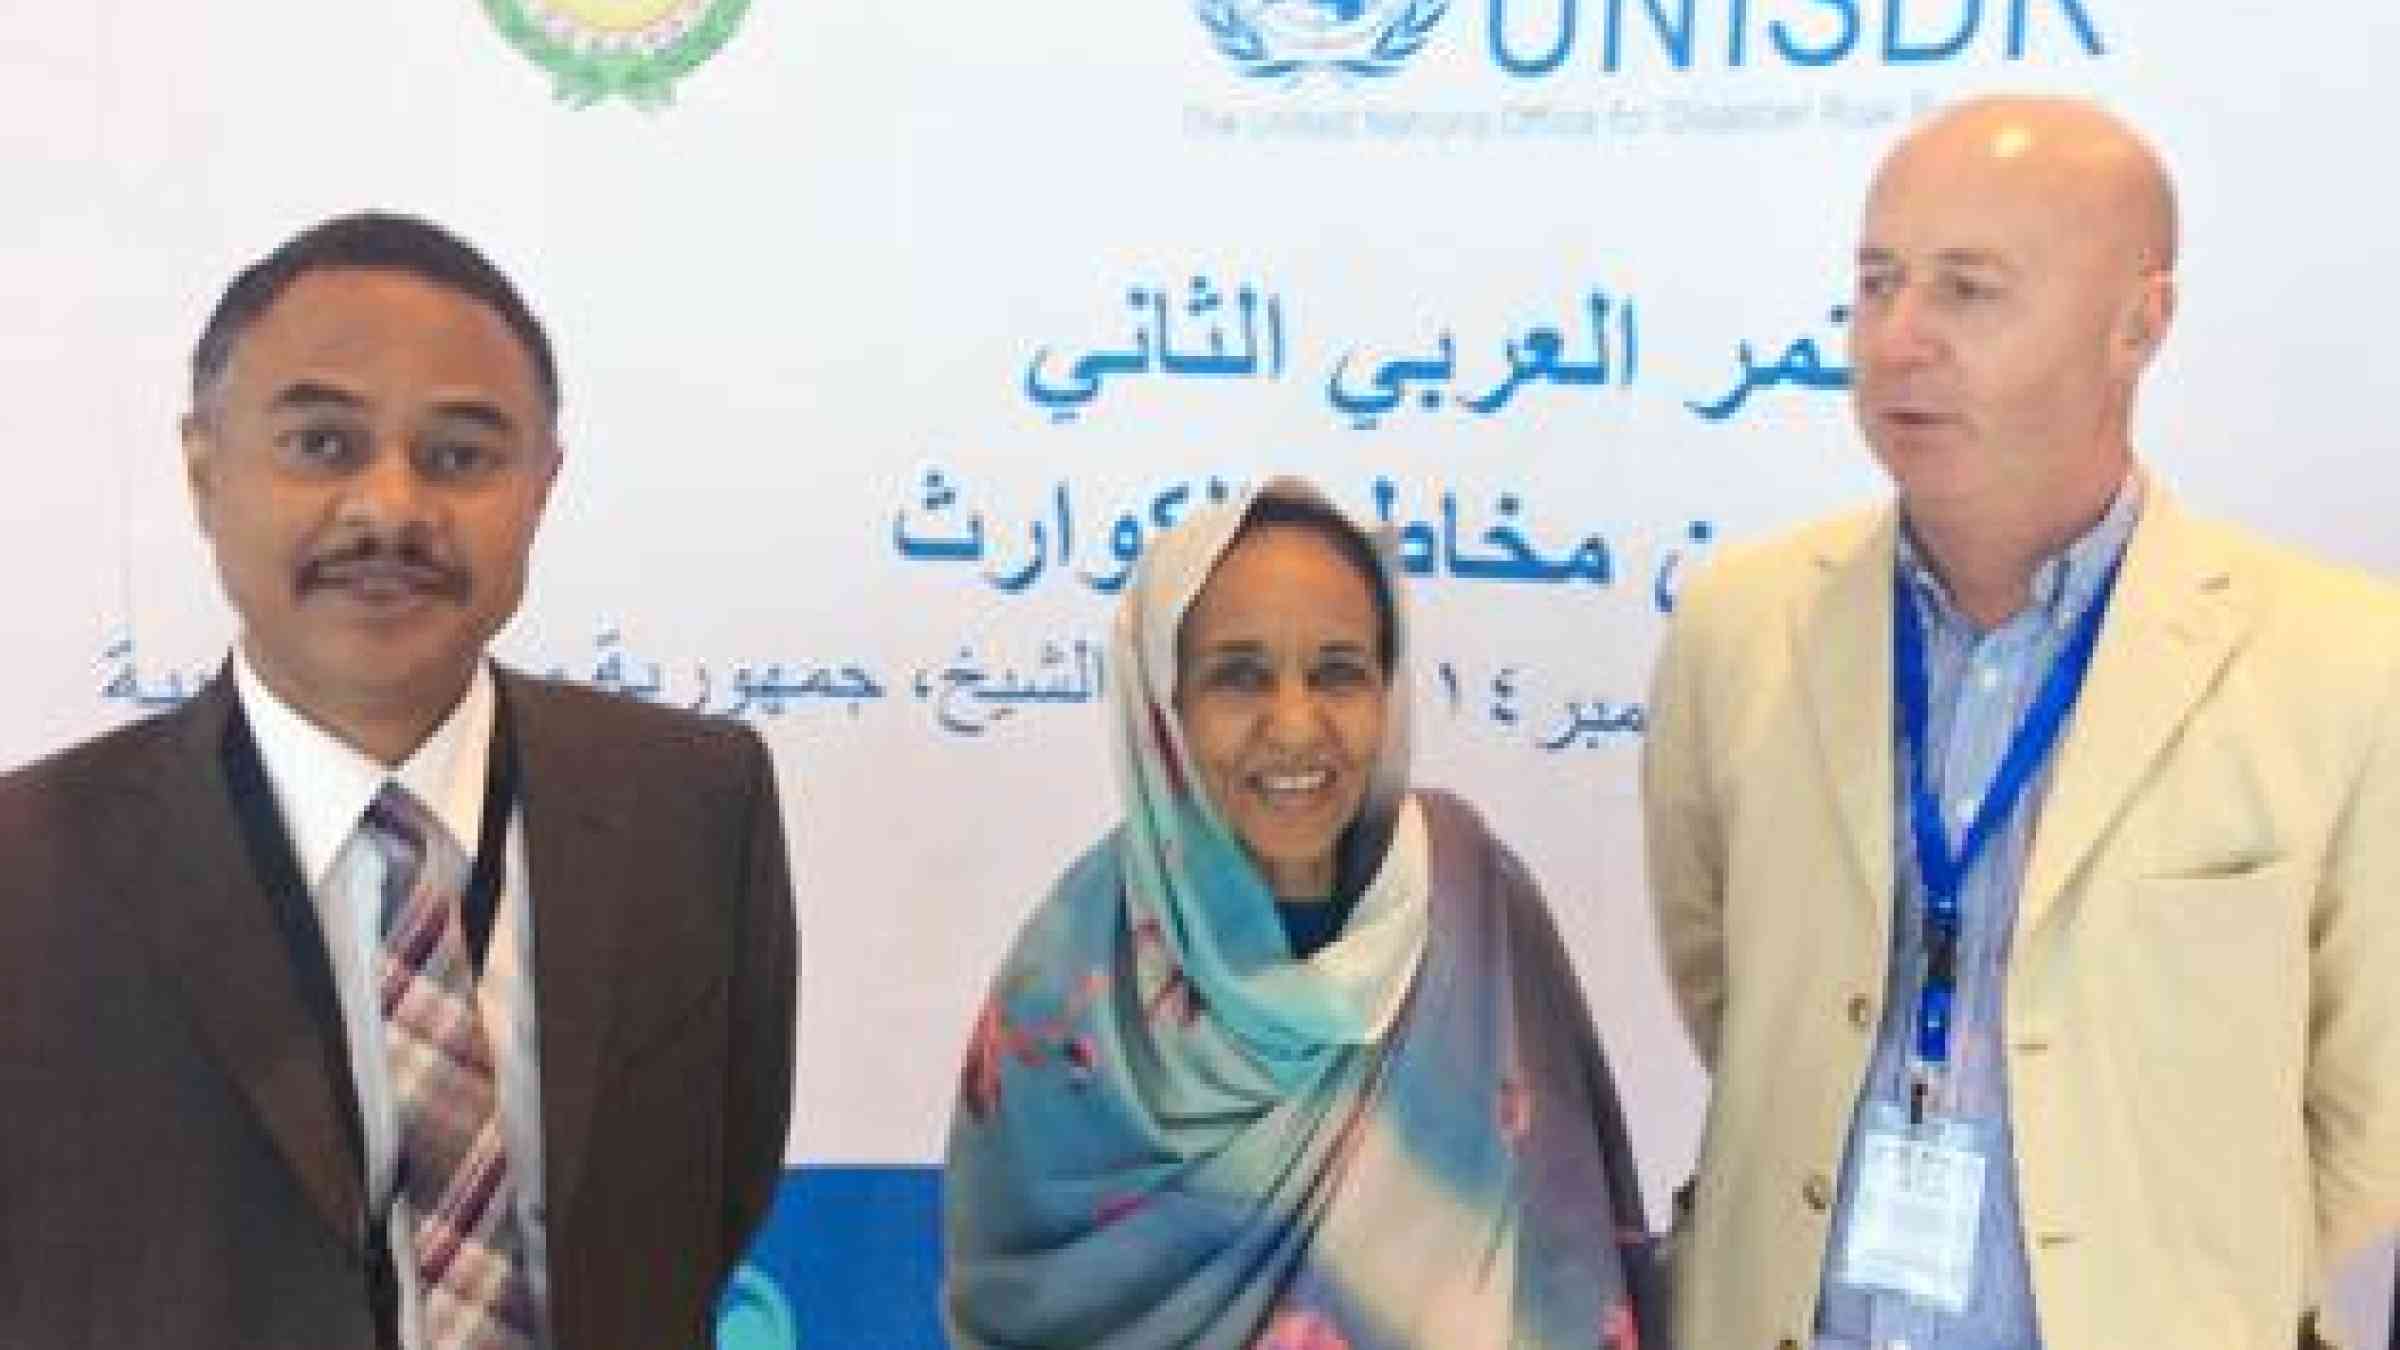 Head of UNISDR Office for Arab States, Amjad Abbashar, talking with keynote speaker on gender, Dr. Widad A. Rahman, Ahfad University, Sudan, and Brian Tisdall, International Committee of the Red Cross. (Photo: UNISDR)